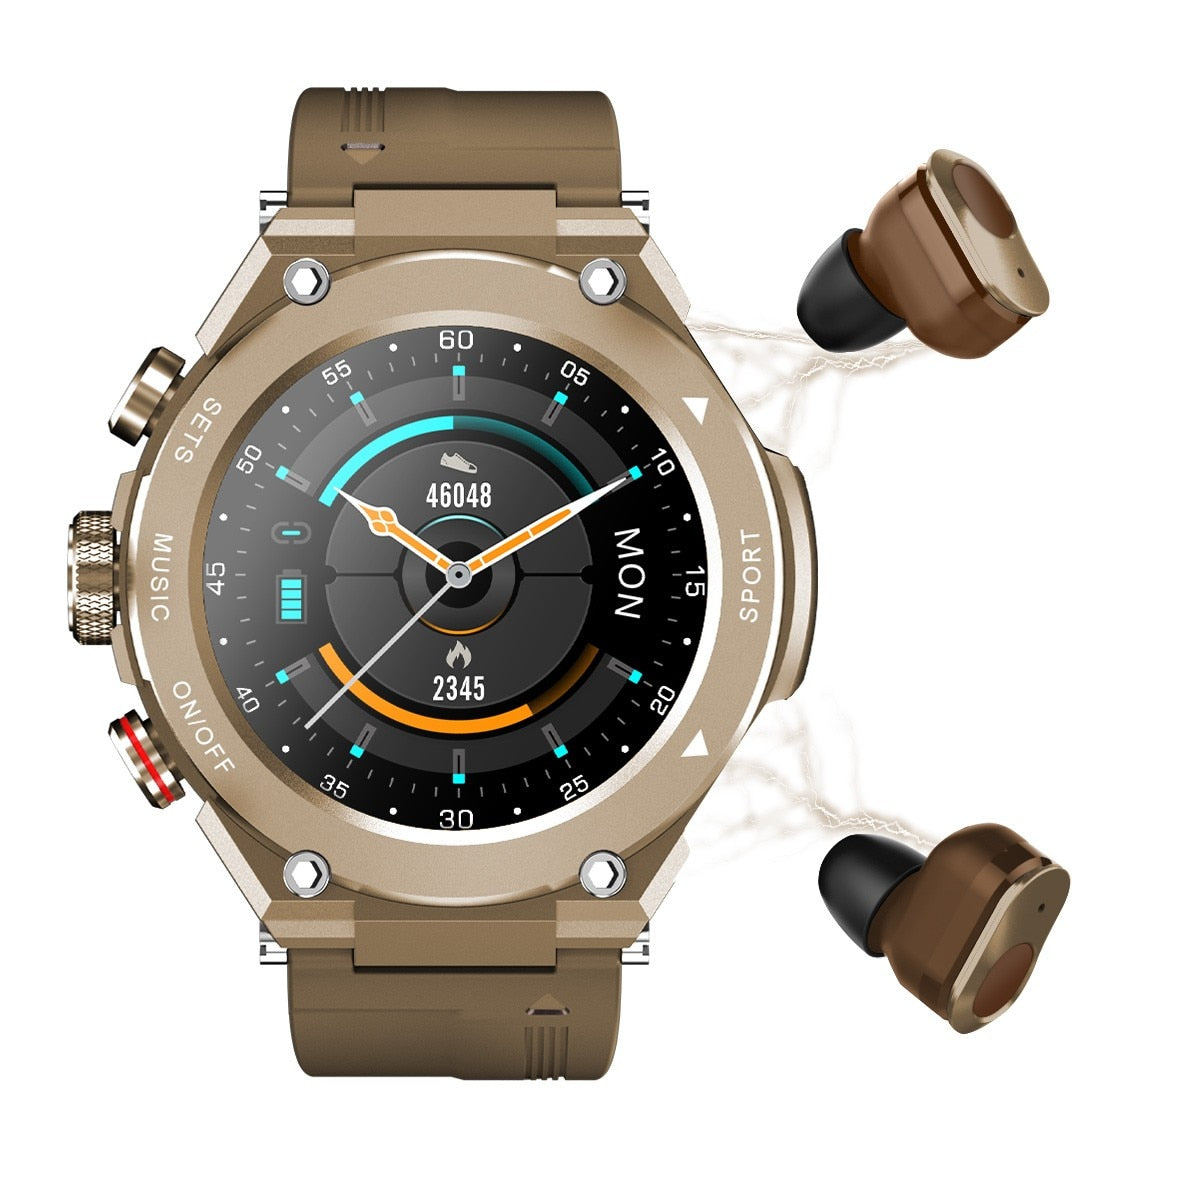 Smart Watch with Earbuds